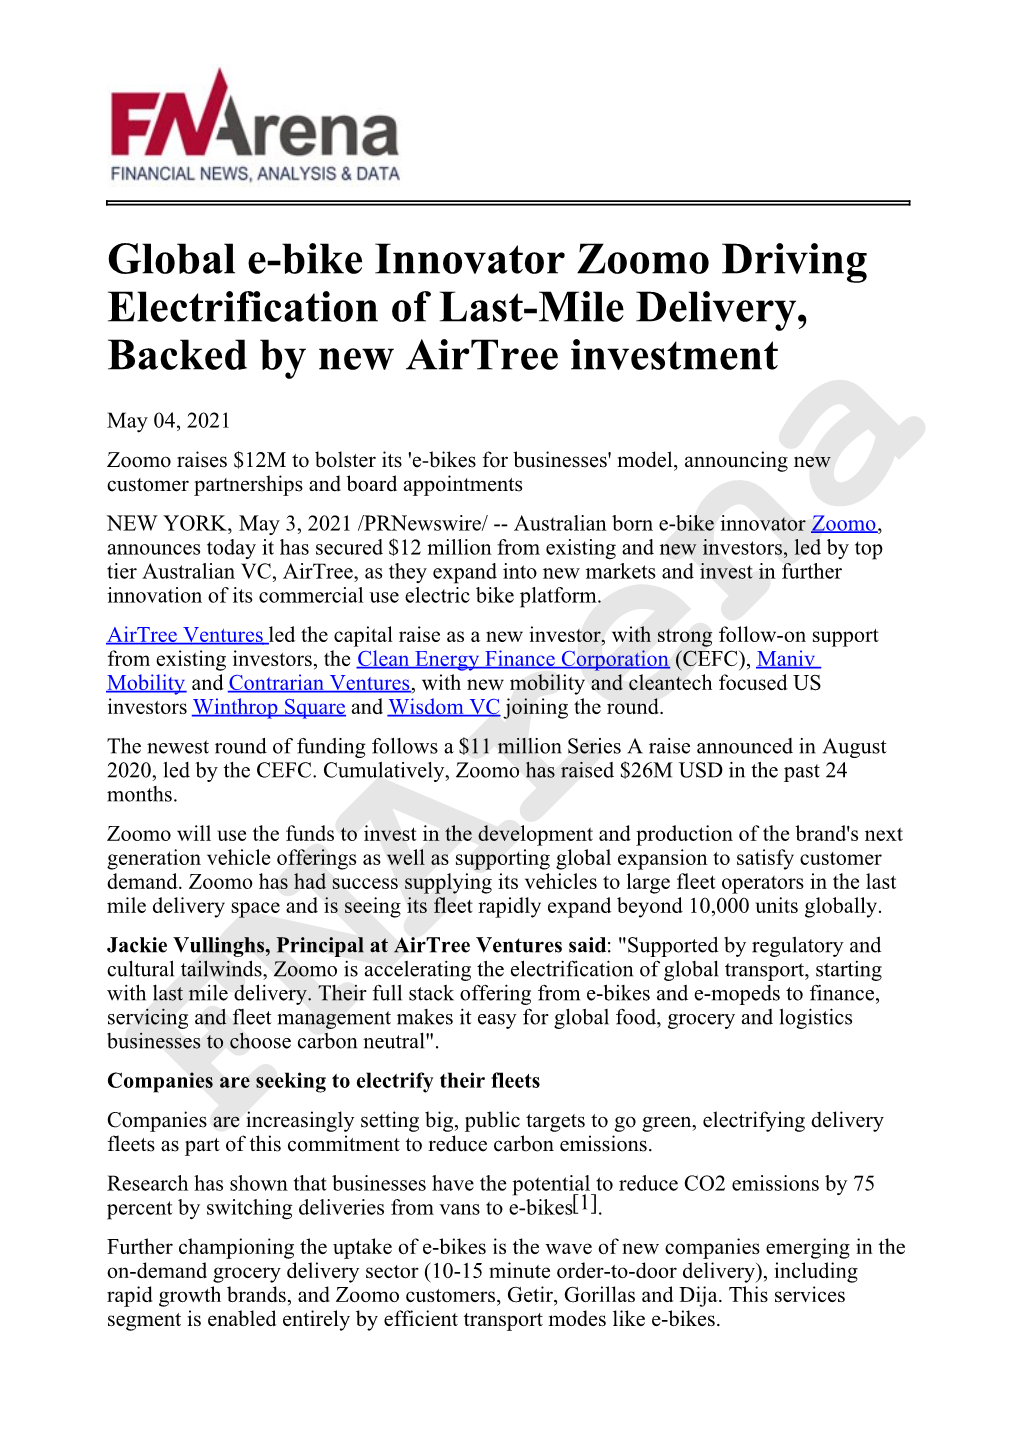 Global E-Bike Innovator Zoomo Driving Electrification of Last-Mile Delivery, Backed by New Airtree Investment